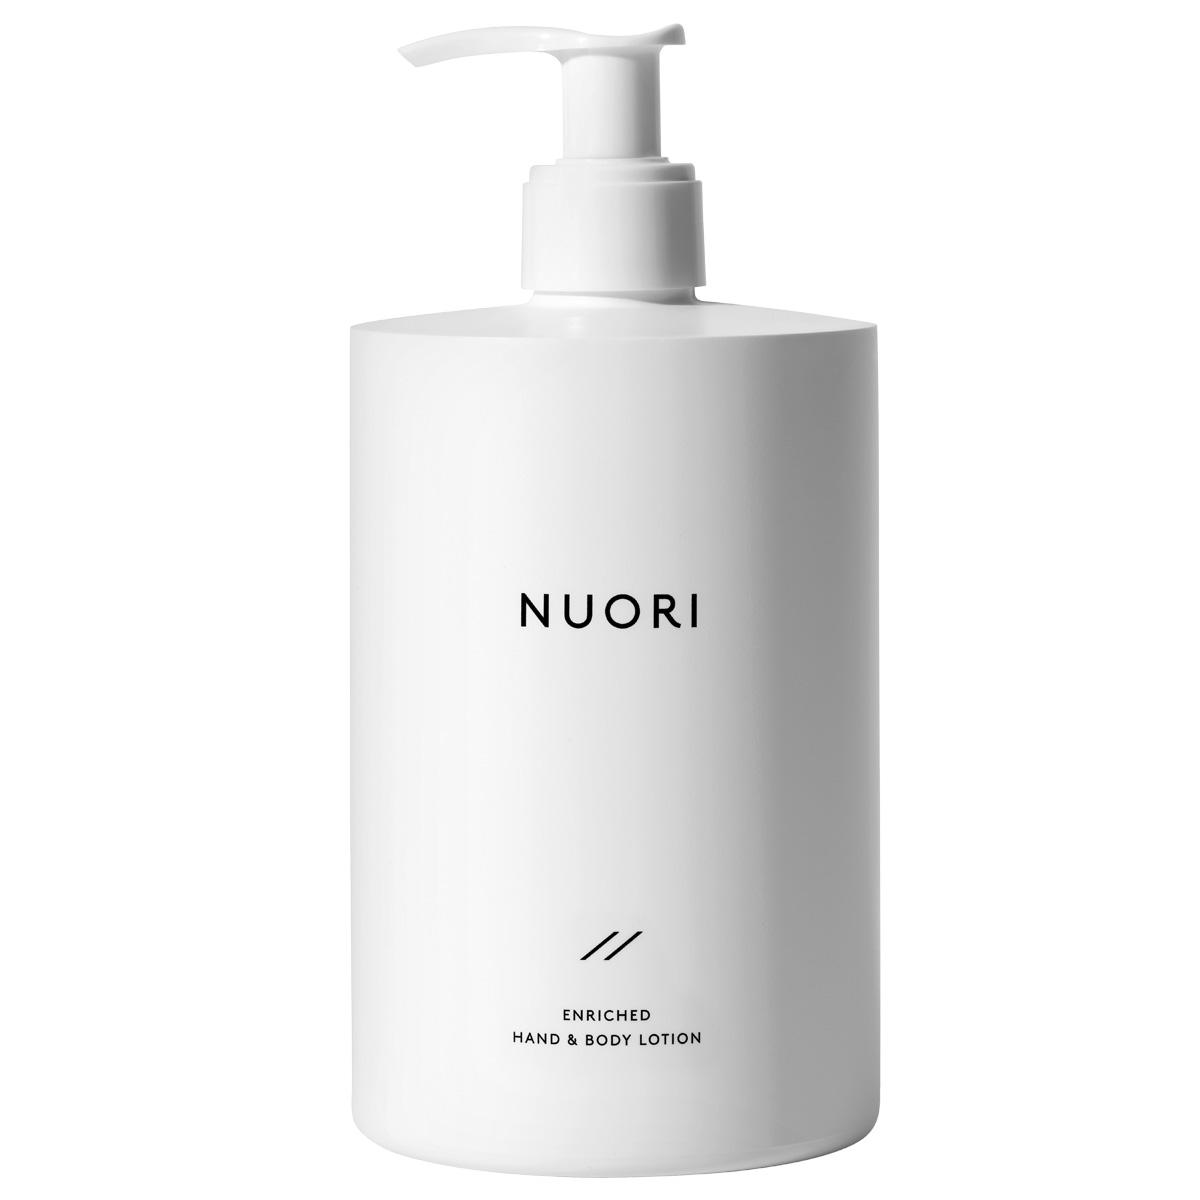 NUORI Enriched Hand & Body Lotion 500 ml - 1